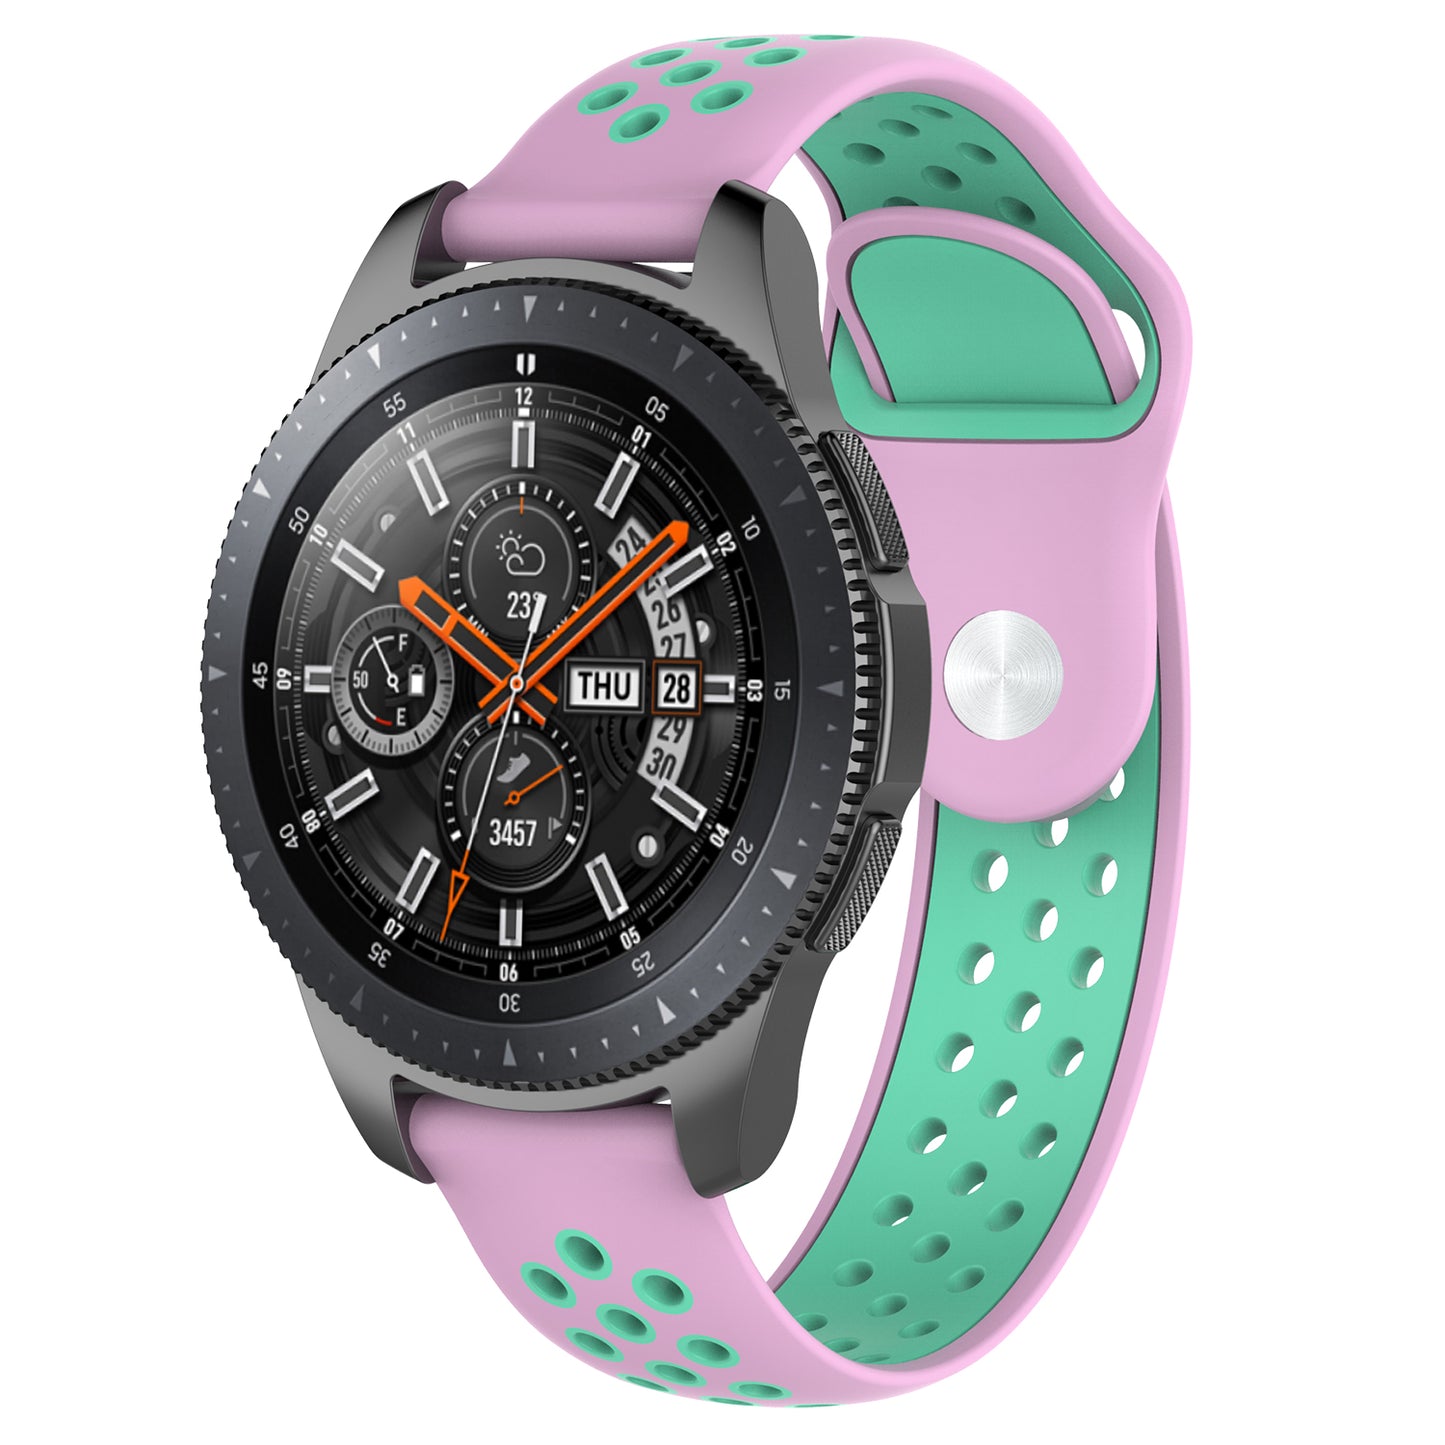 Perforated Rubber Strap for Samsung Galaxy Watch, Gear S3 & Others